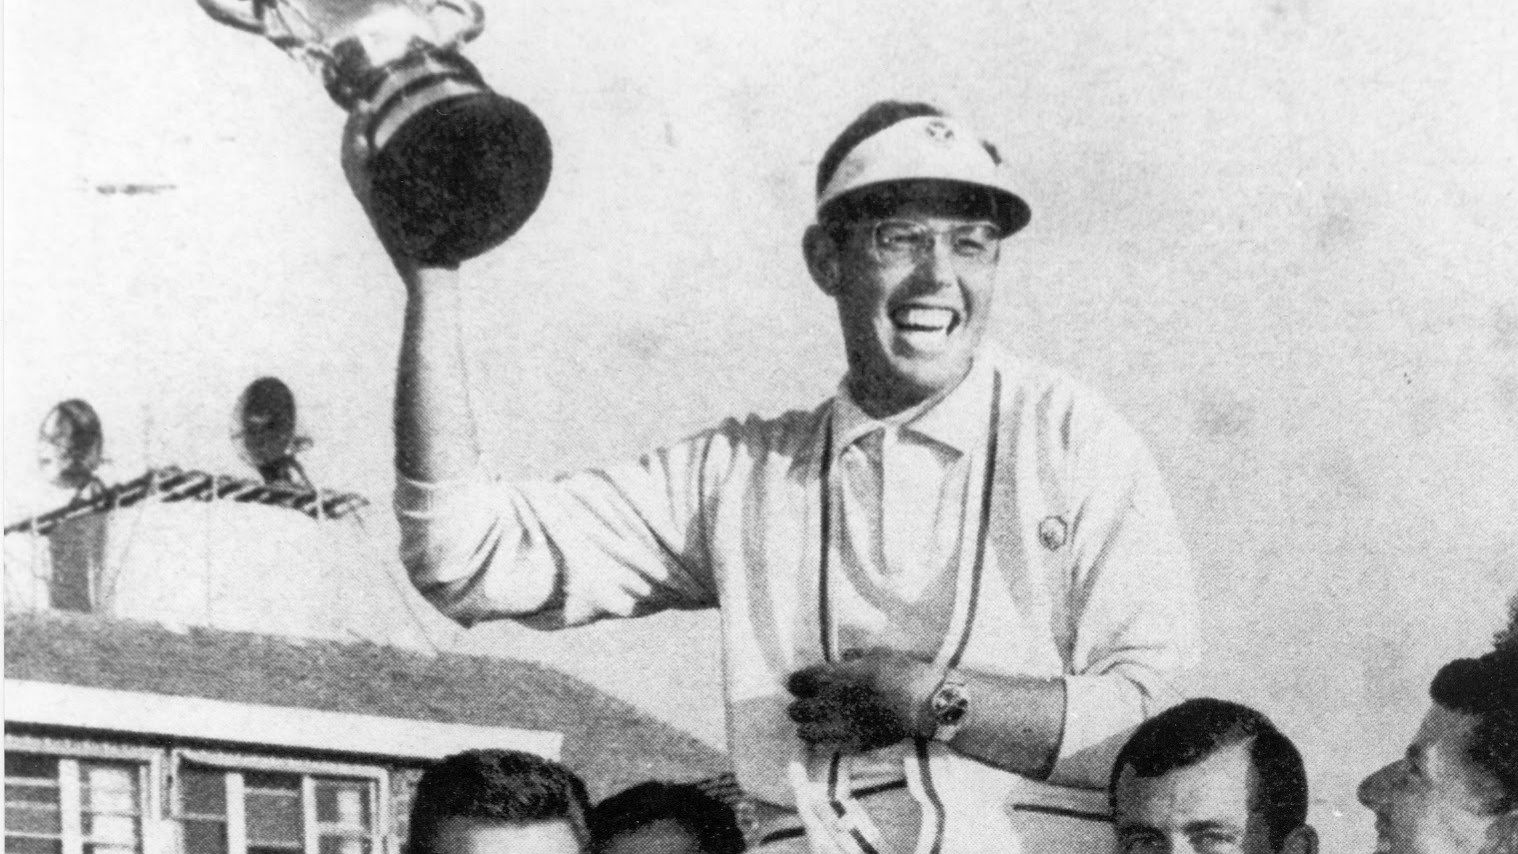 Australian golf community mourning death of 'one of our greatest players' Frank Phillips